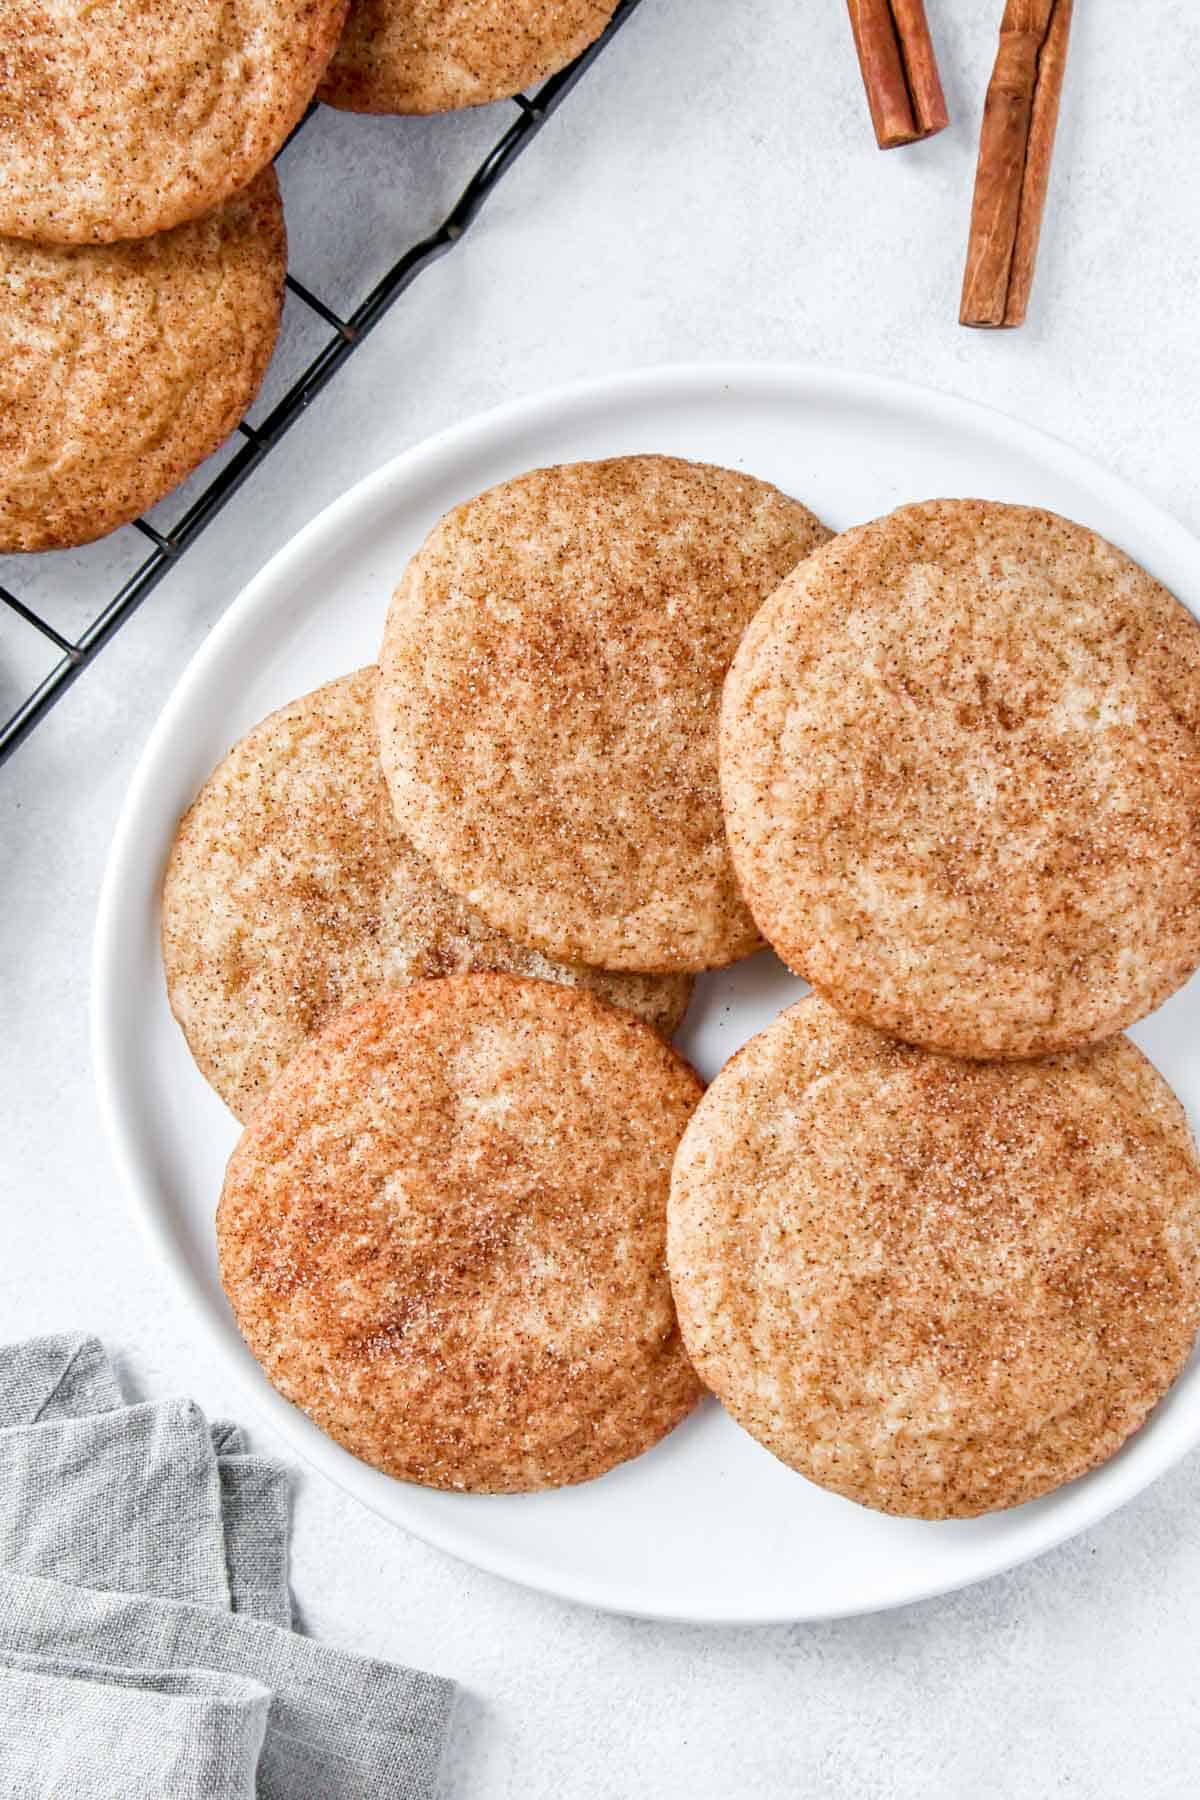 5 snickerdoodle cookies on a plate next to a wire rack with more on it.